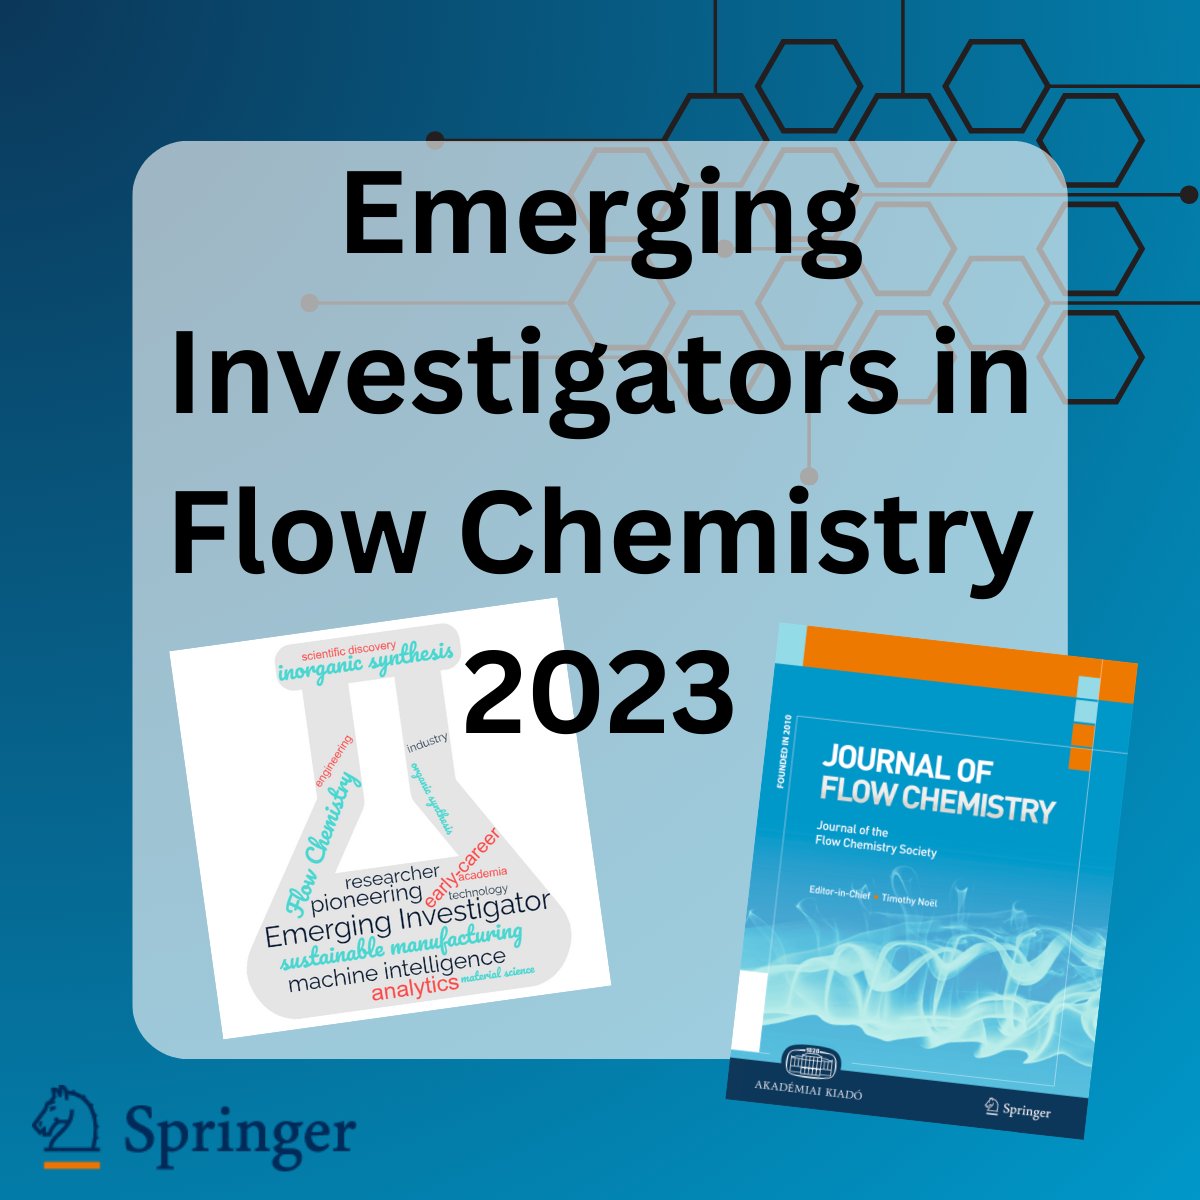 Did you already had the change to check out the 2023 edition of “Emerging Investigators in Flow Chemistry”? A big thank you to Cecilia Bottecchia, Wu Jie and Luca Capaldo for putting this special issue together: link.springer.com/collections/ch… #FlowChemistry